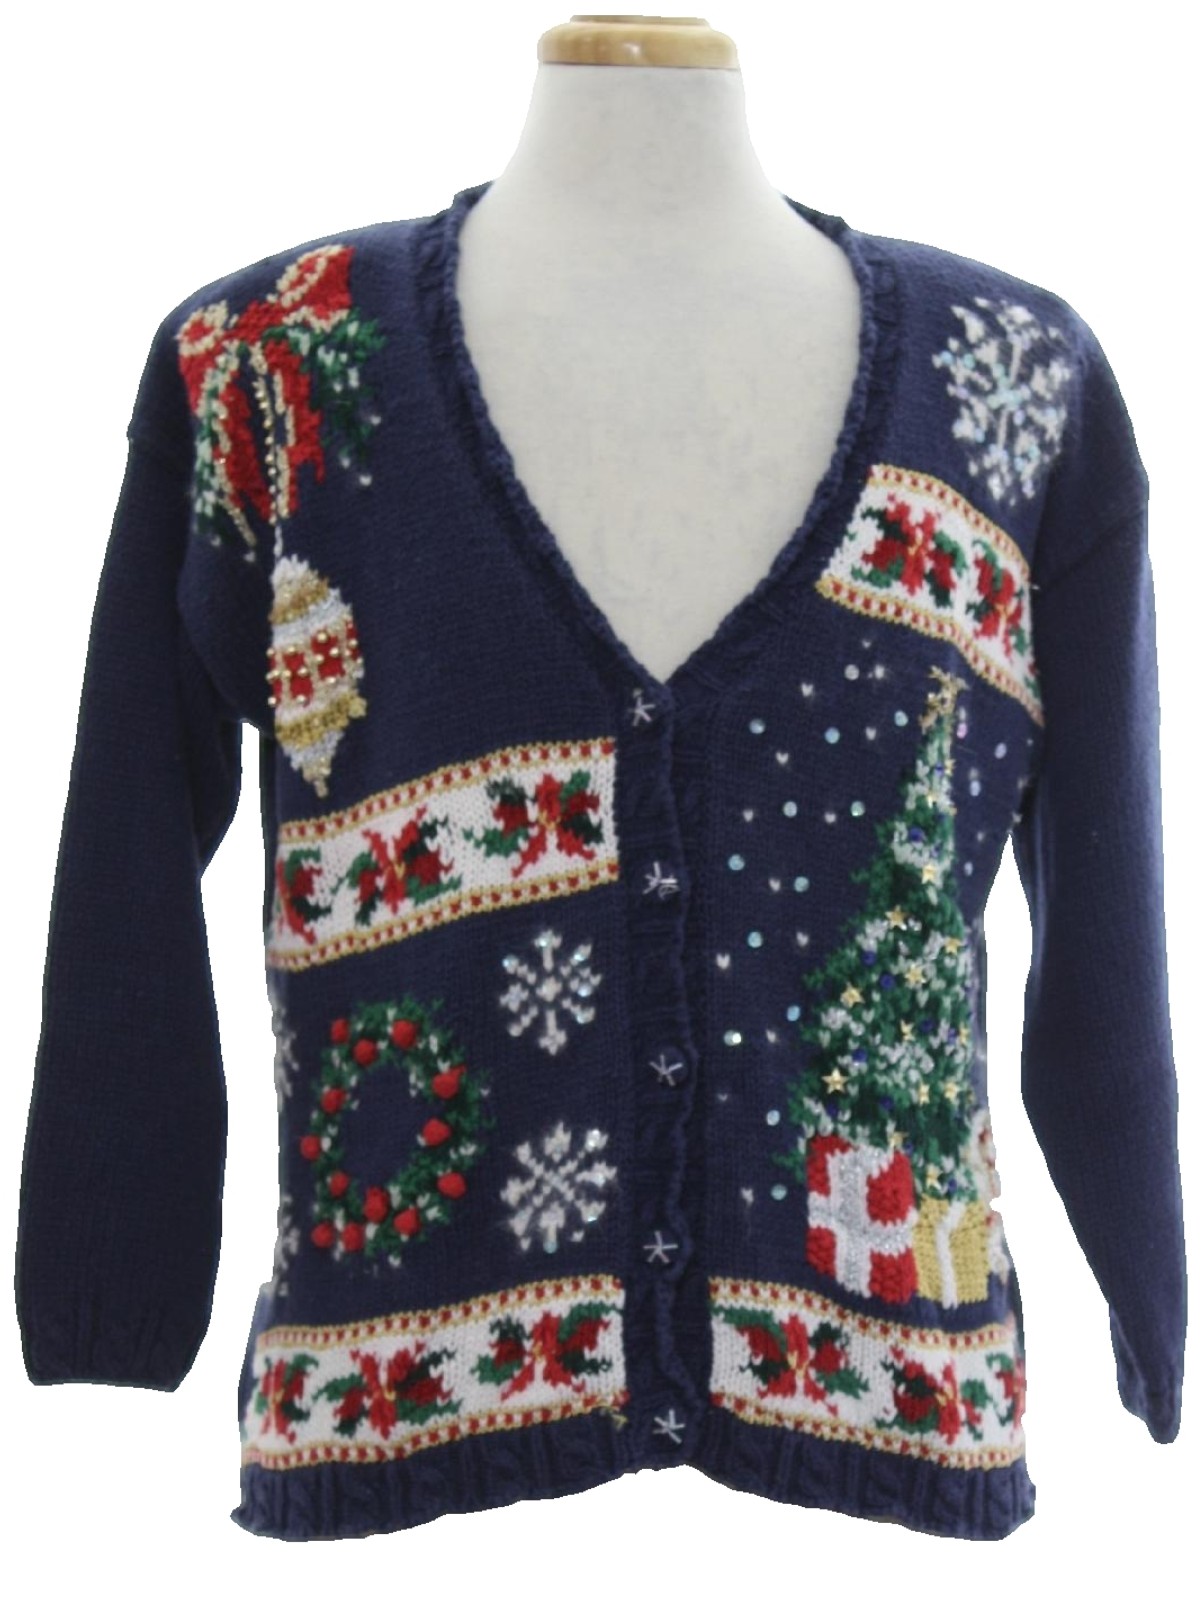 Retro Nineties Ugly Christmas Cardigan Sweater: 90s authentic vintage ...